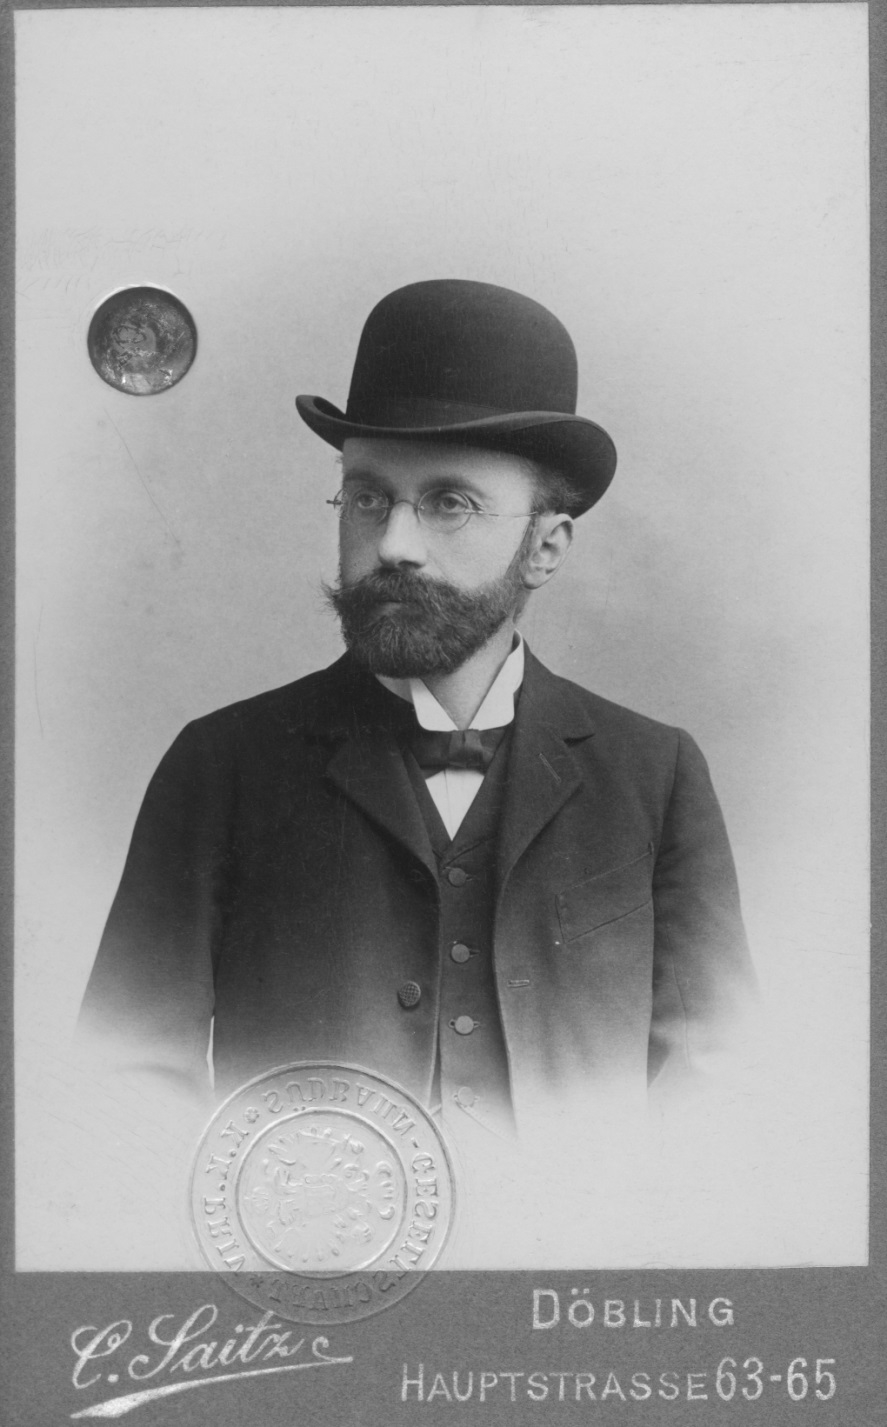 The Social Democrat Emil Reich was a co-founder of Austria’s first adult education centre, the Volksheim Ottakring, in 1901, and was a leading proponent of the then flourishing adult education movement. Photographer: C. Saitz, Vienna-Döbling. Source: Archive of the University of Vienna, 106.I.1028